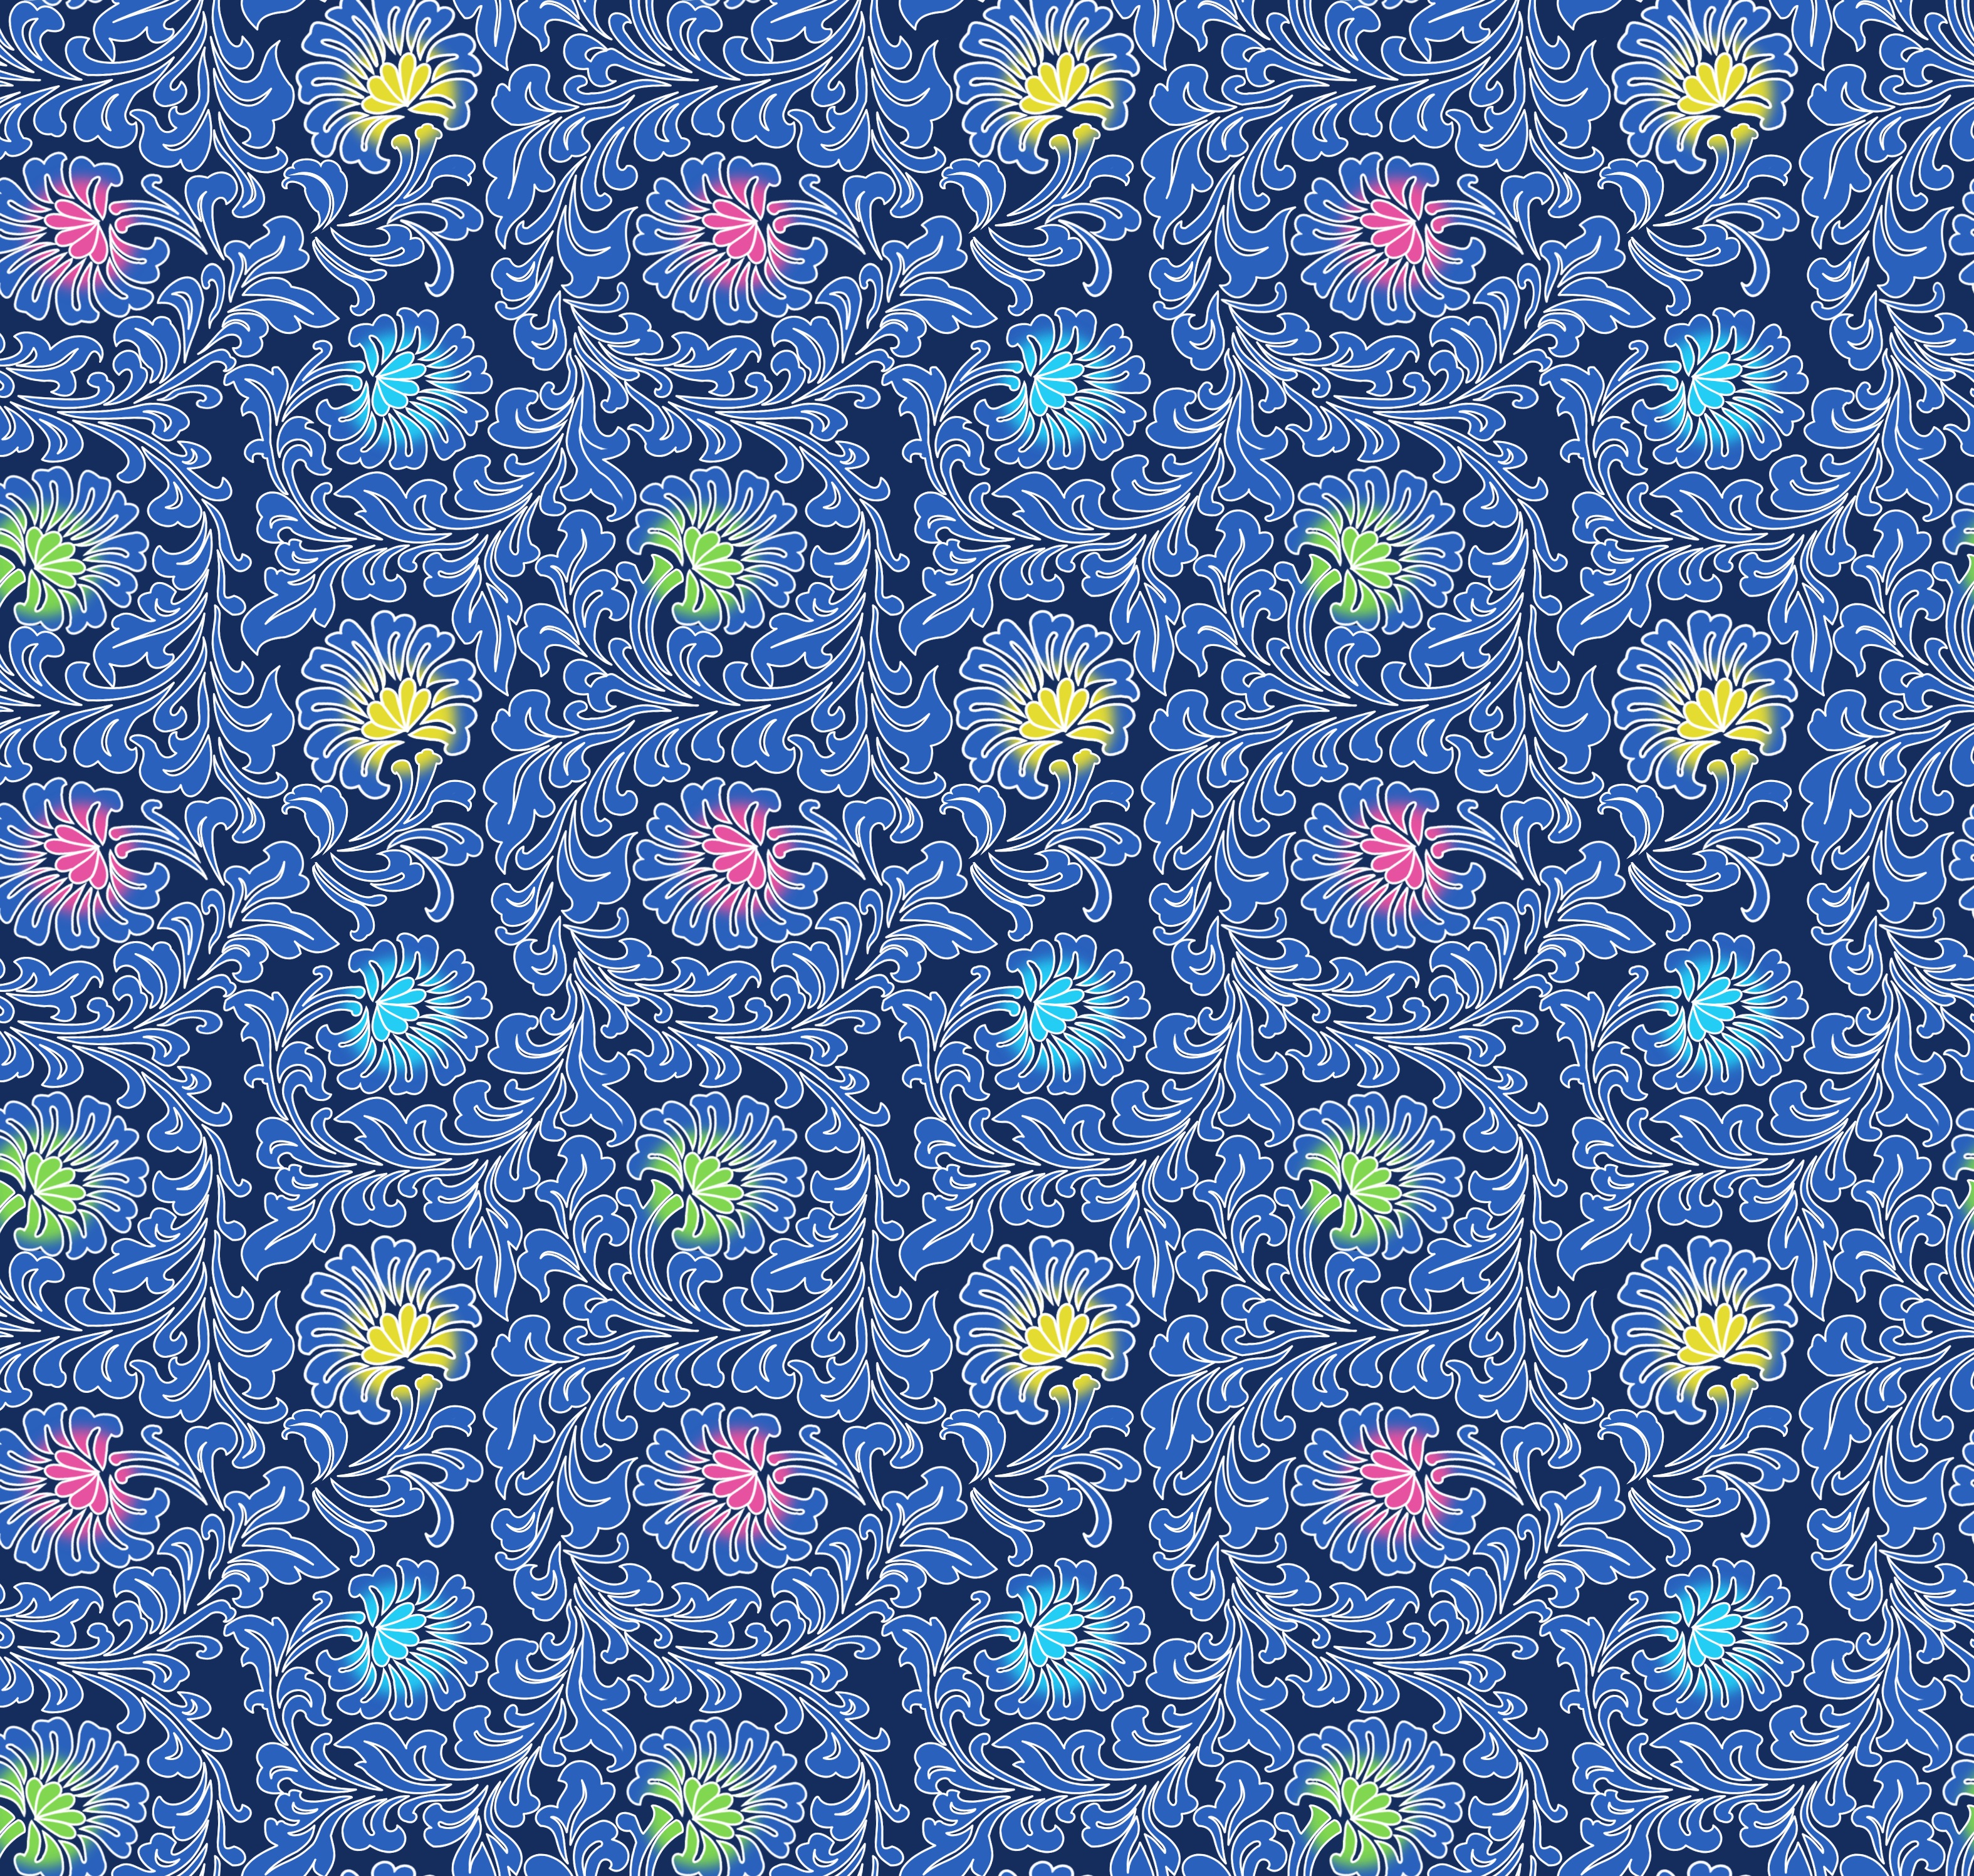 textures, flowers, asia, patterns, blue, texture, seamless cell phone wallpapers